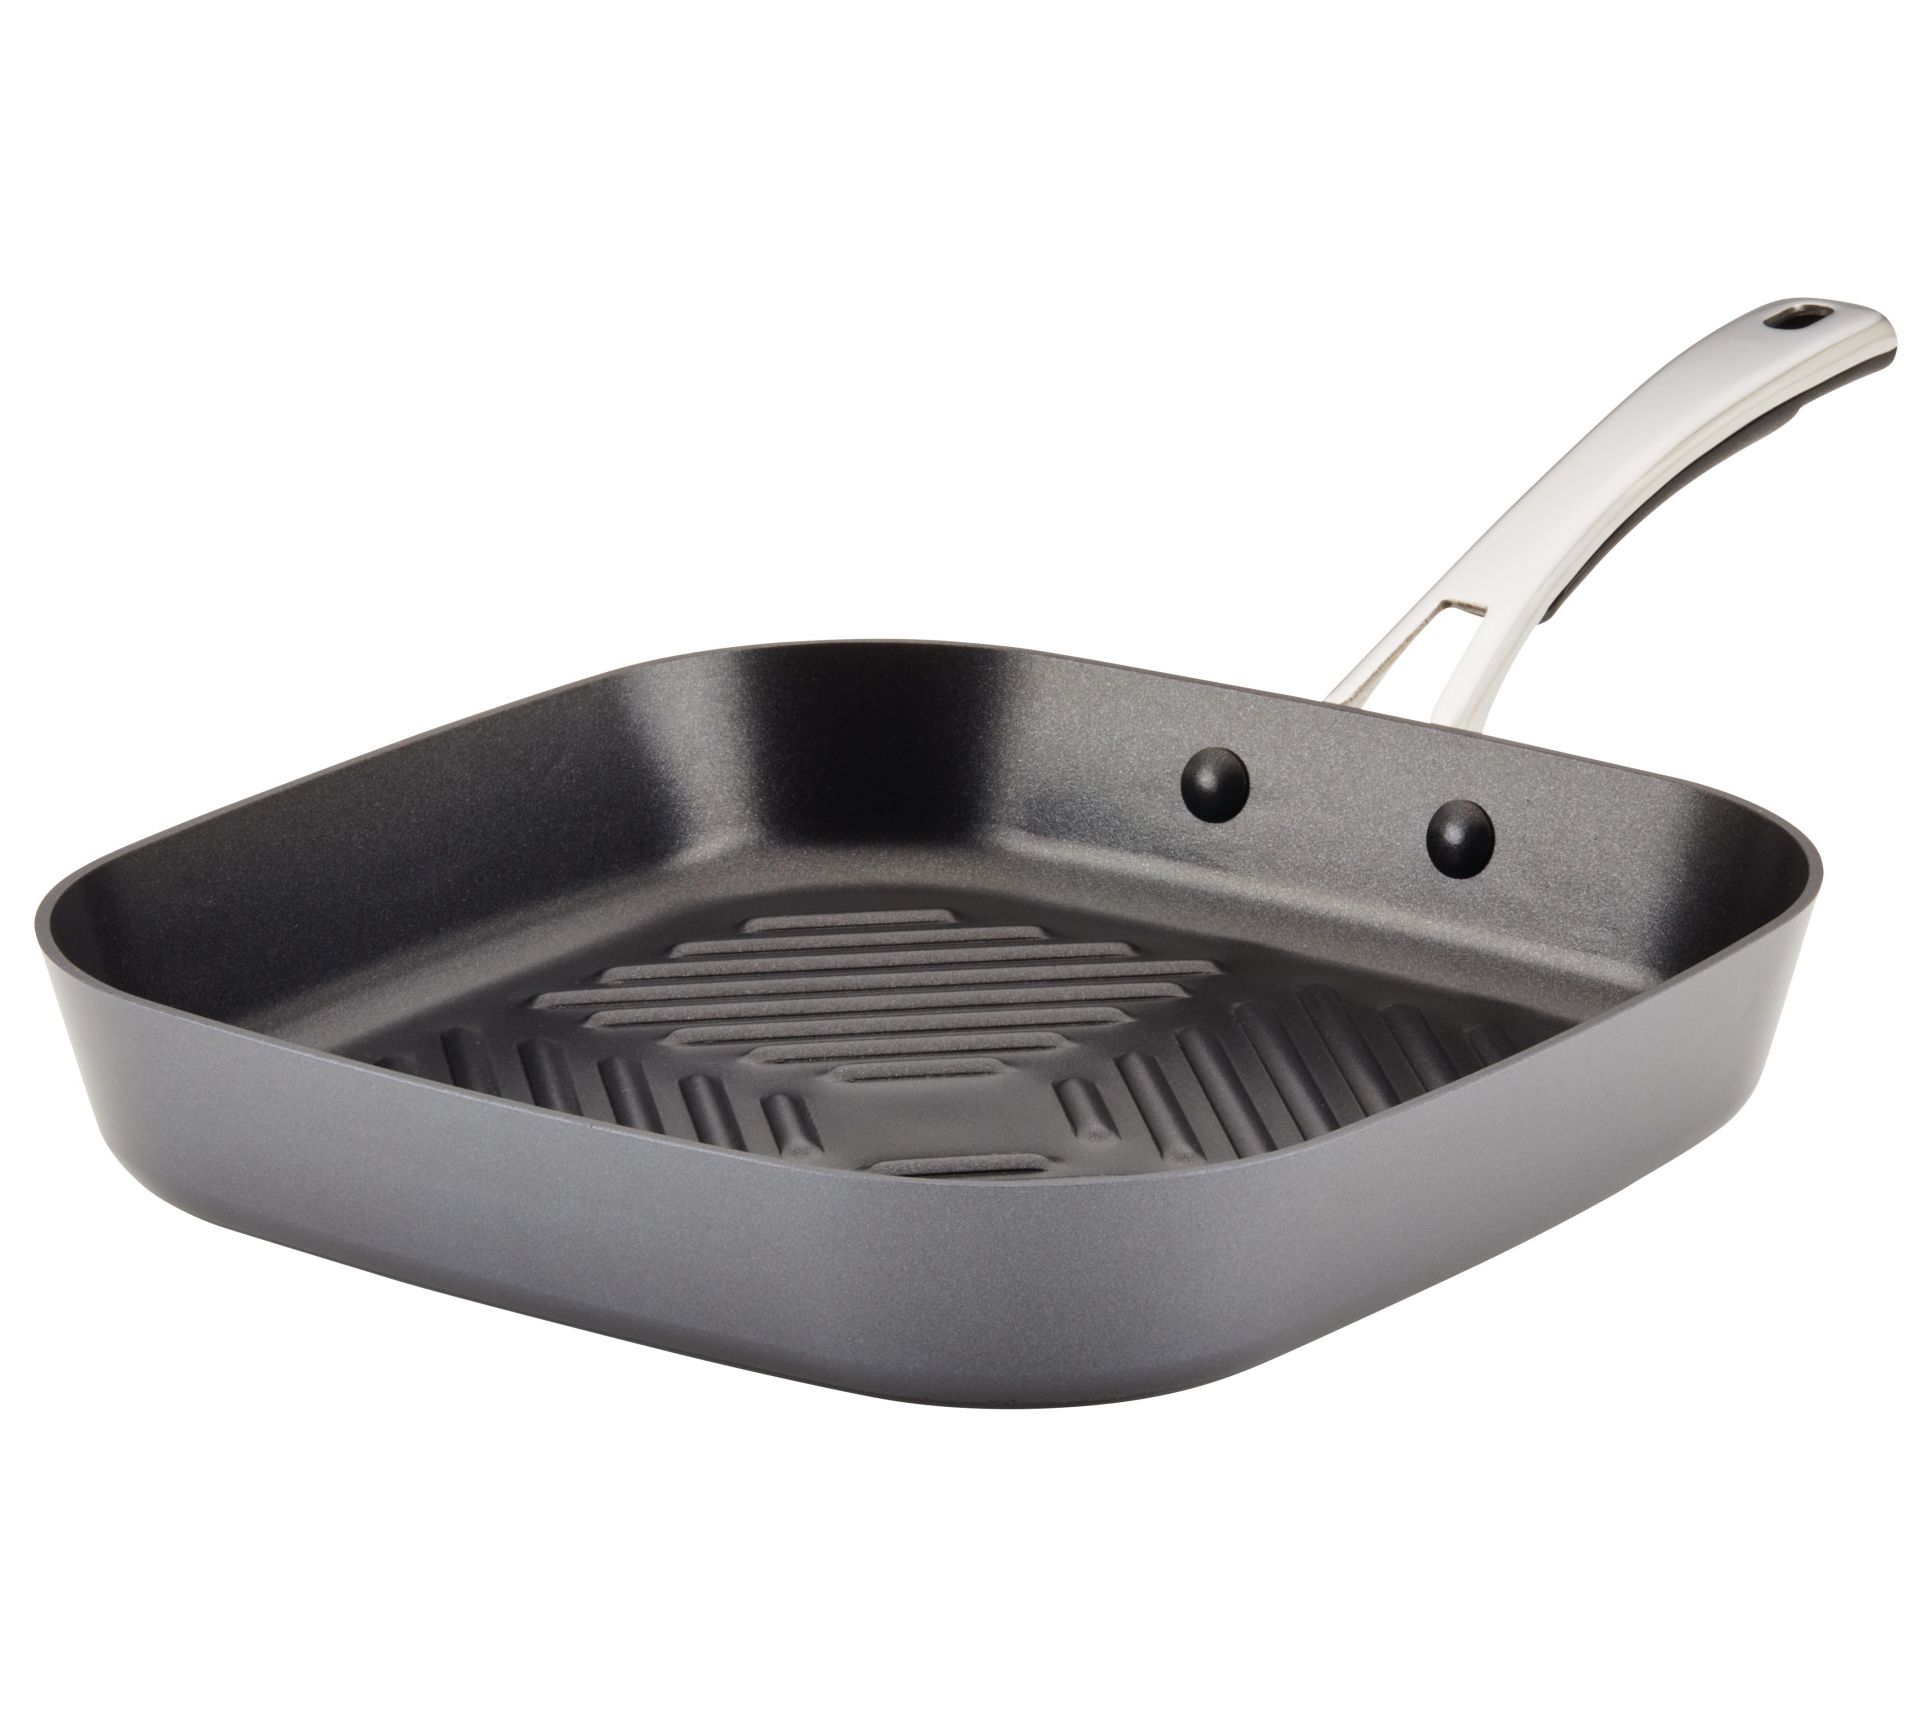  Rachael Ray Cook + Create Nonstick Frying Pans/Skillet